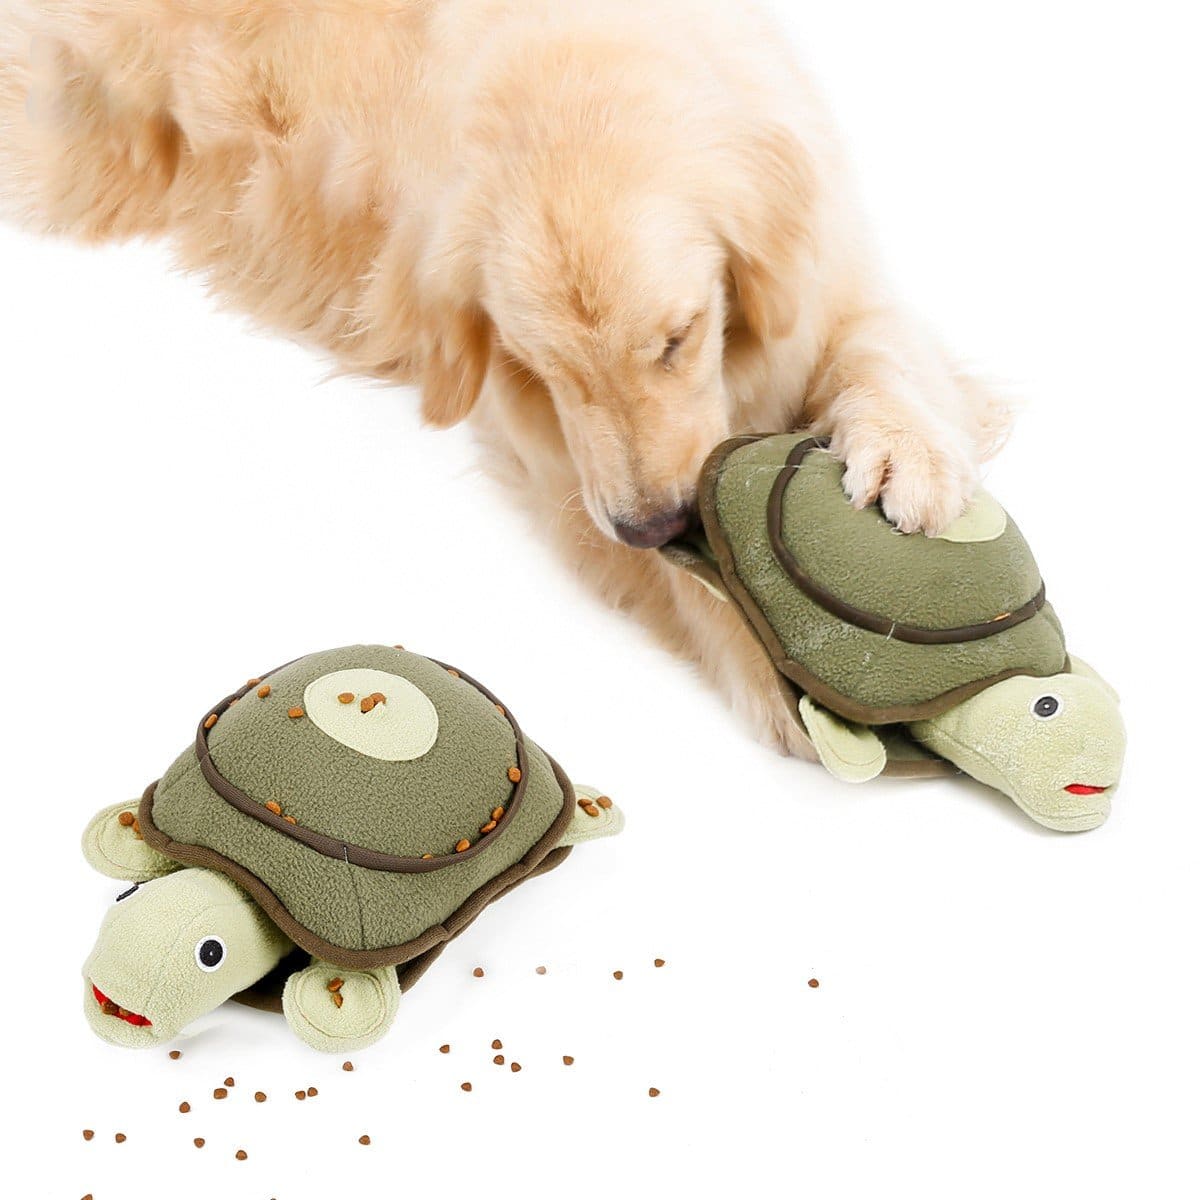 Snuffle Toy 